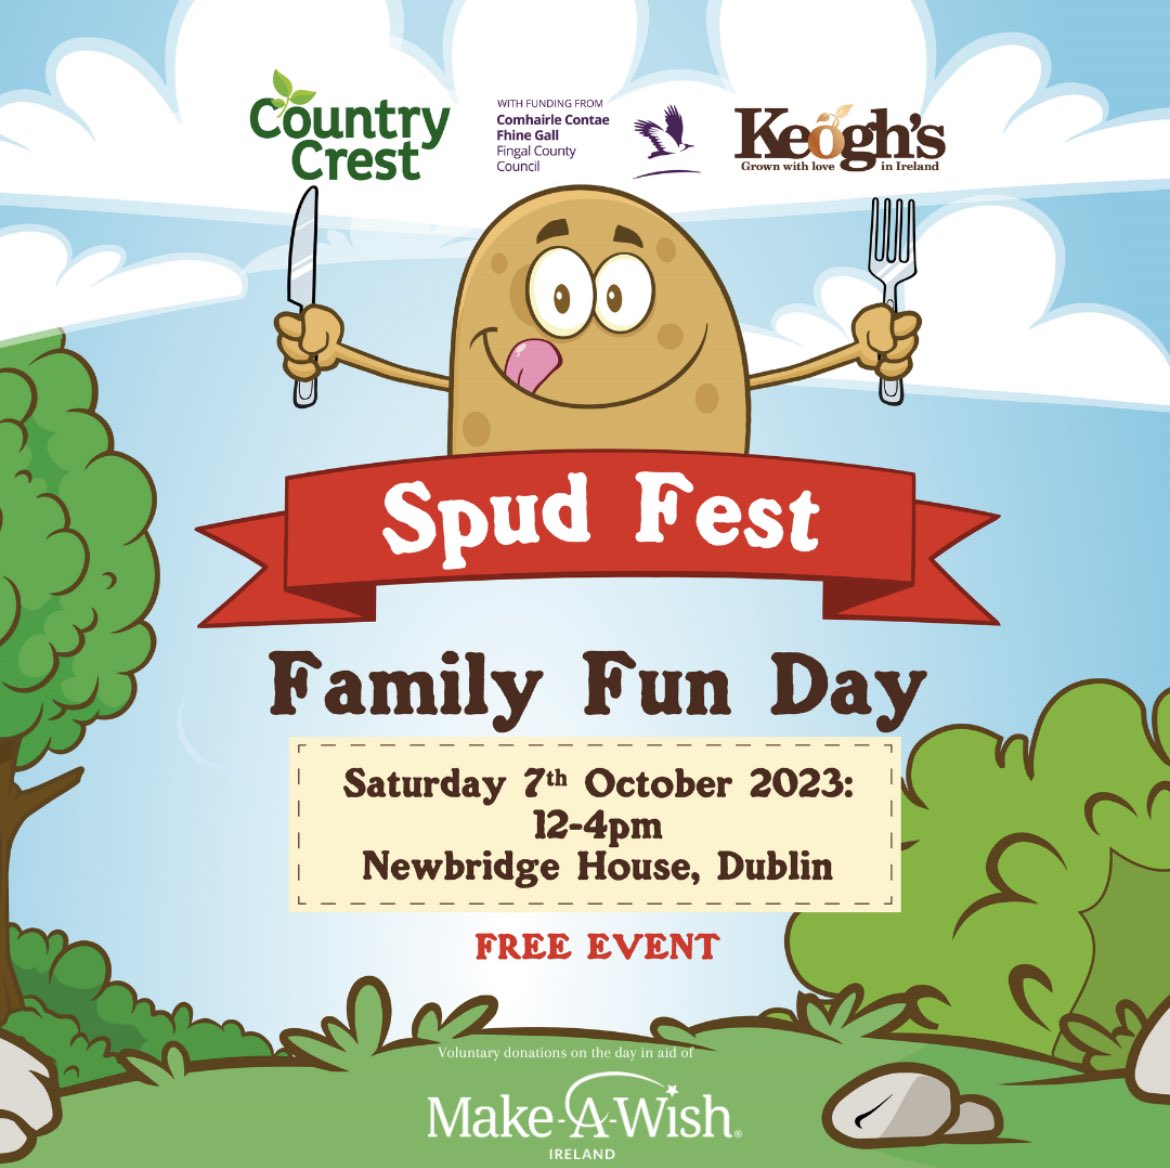 Country Crest & @Keoghsfarm Farm invite you @NewbridgeHF for a family day to celebrate the mighty spud! 🥔🚜🤹‍♀️🎶 We’ll have delicious baked potatoes, games & entertainment. All donations on the day for Make-A-Wish will be welcome. Hope to see you then! #NationalPotatoDay